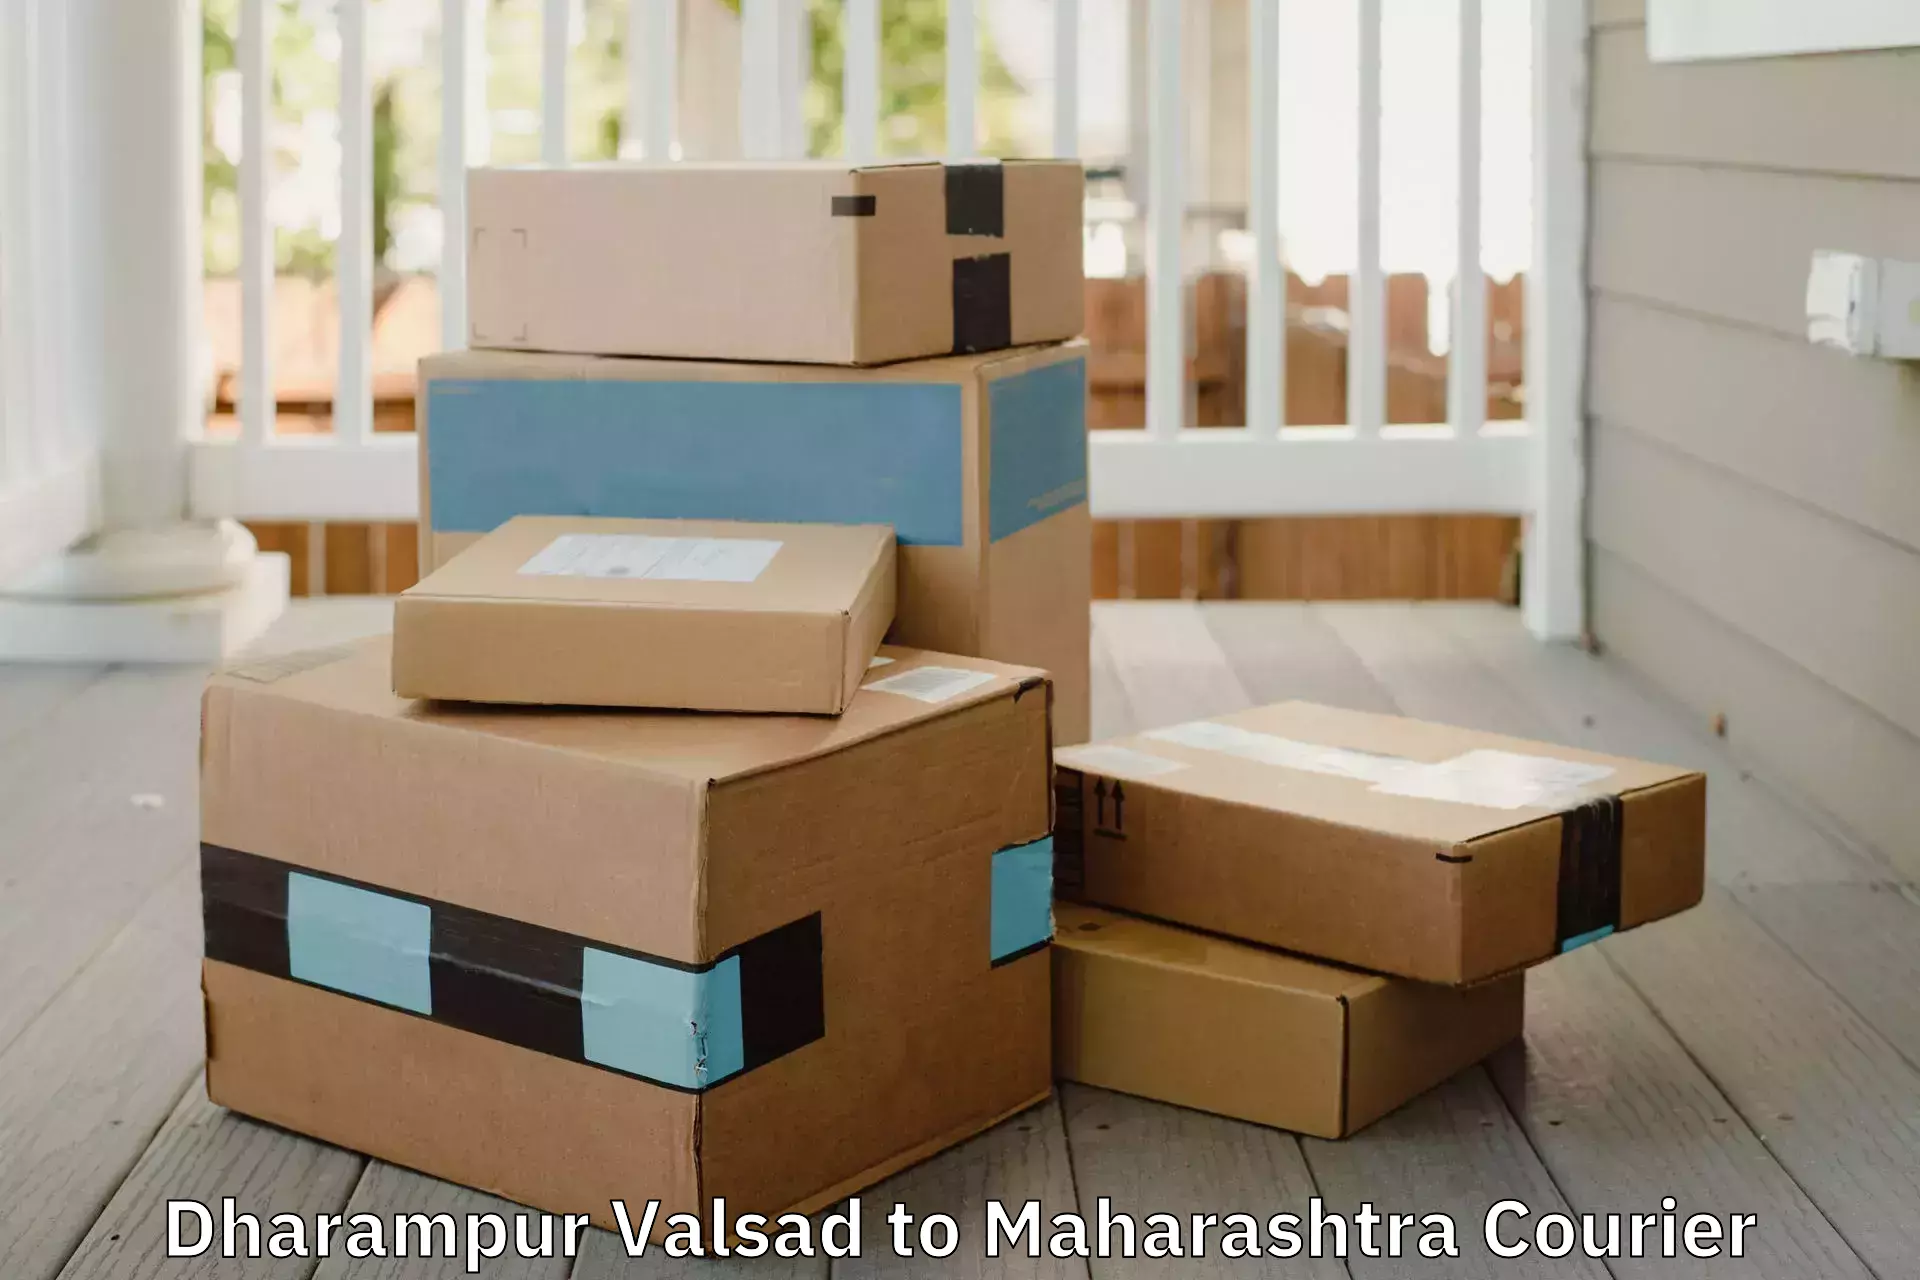 Household moving experts Dharampur Valsad to Mahim